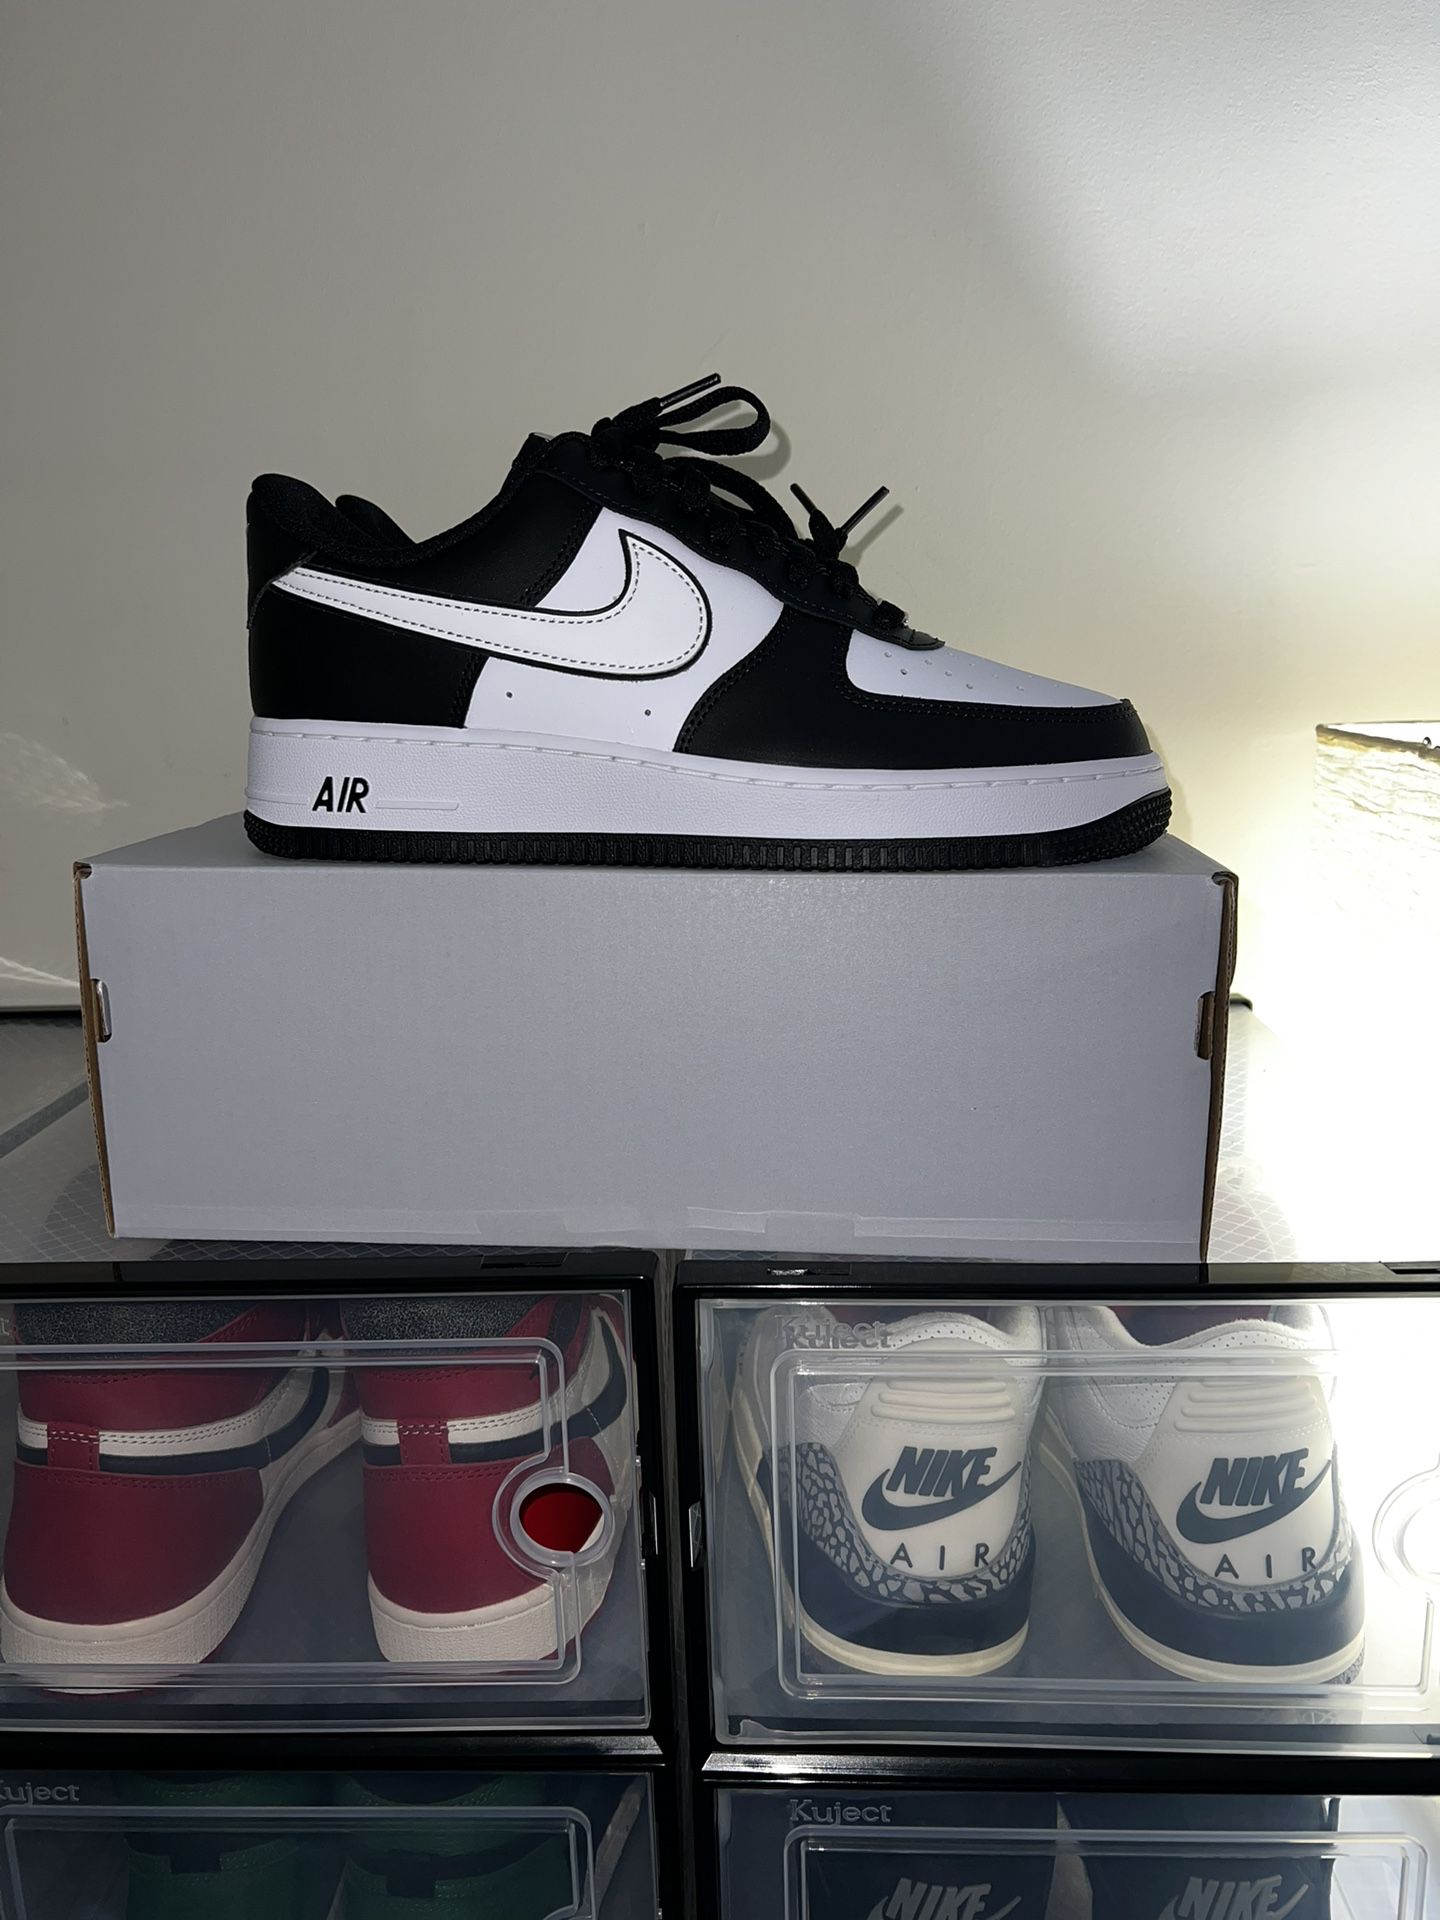 NIKE AIR FORCE 1 Men’s Size 9 New !!